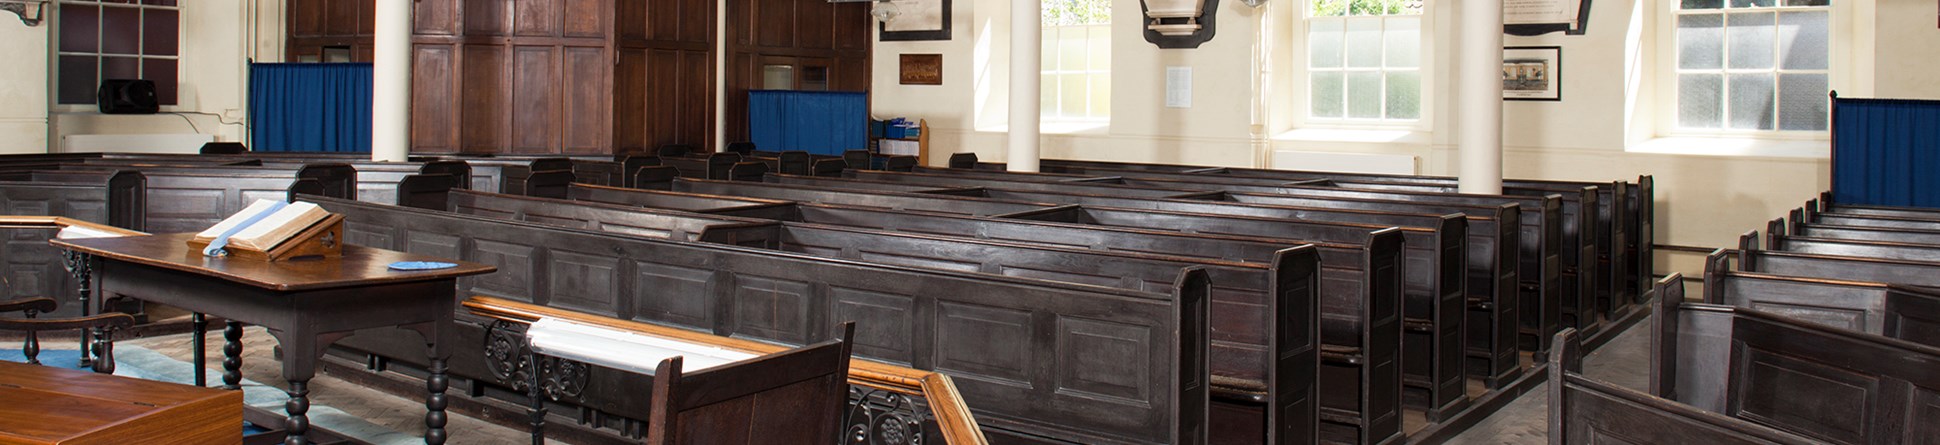 Interior view of the Old Meeting House, Colegate, Norwich.